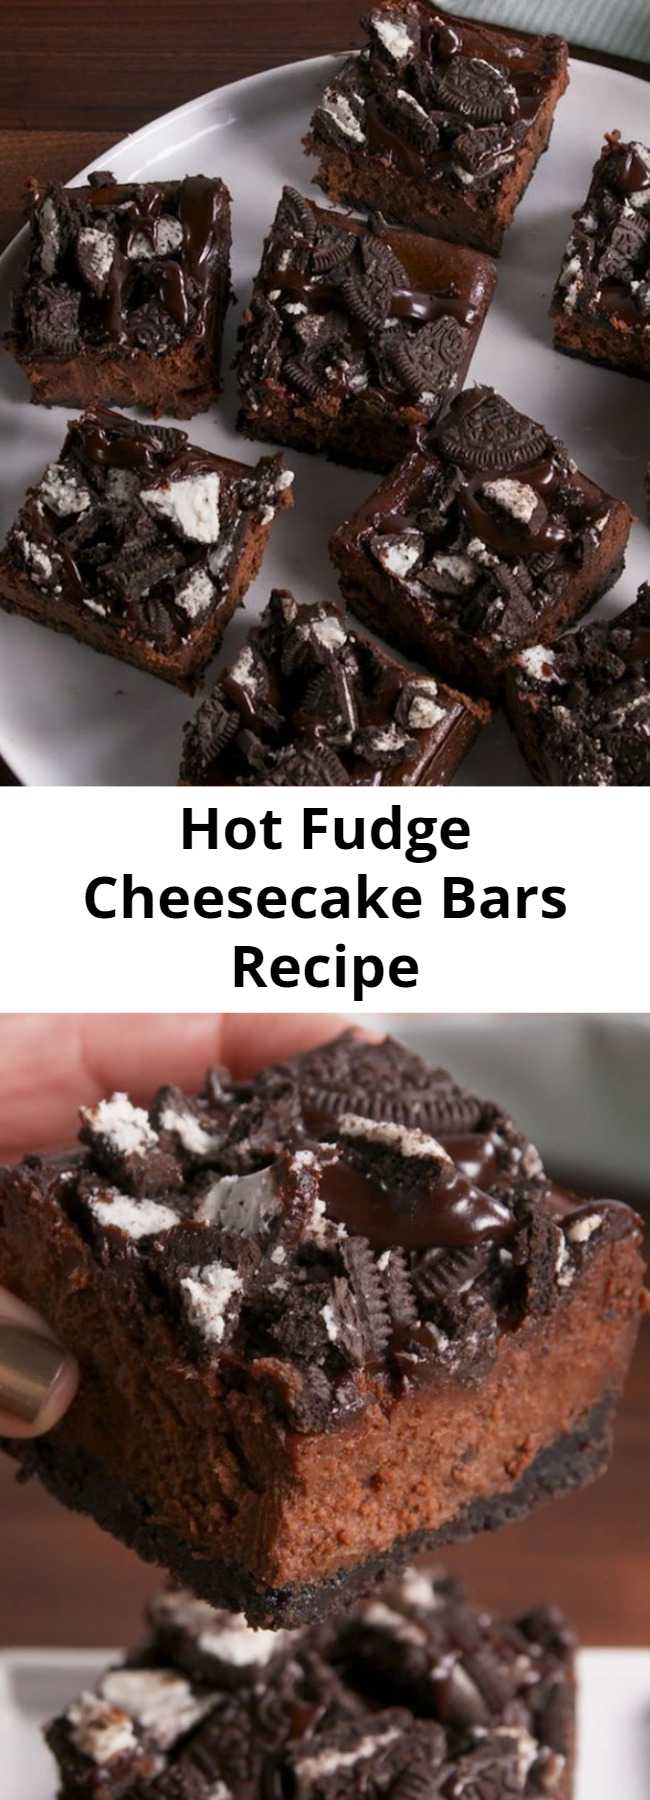 Hot Fudge Cheesecake Bars Recipe - The chocolate lover's dream. This will fulfill all your chocolate fantasies. #food #easyrecipe #dessert #ideas #chocolate